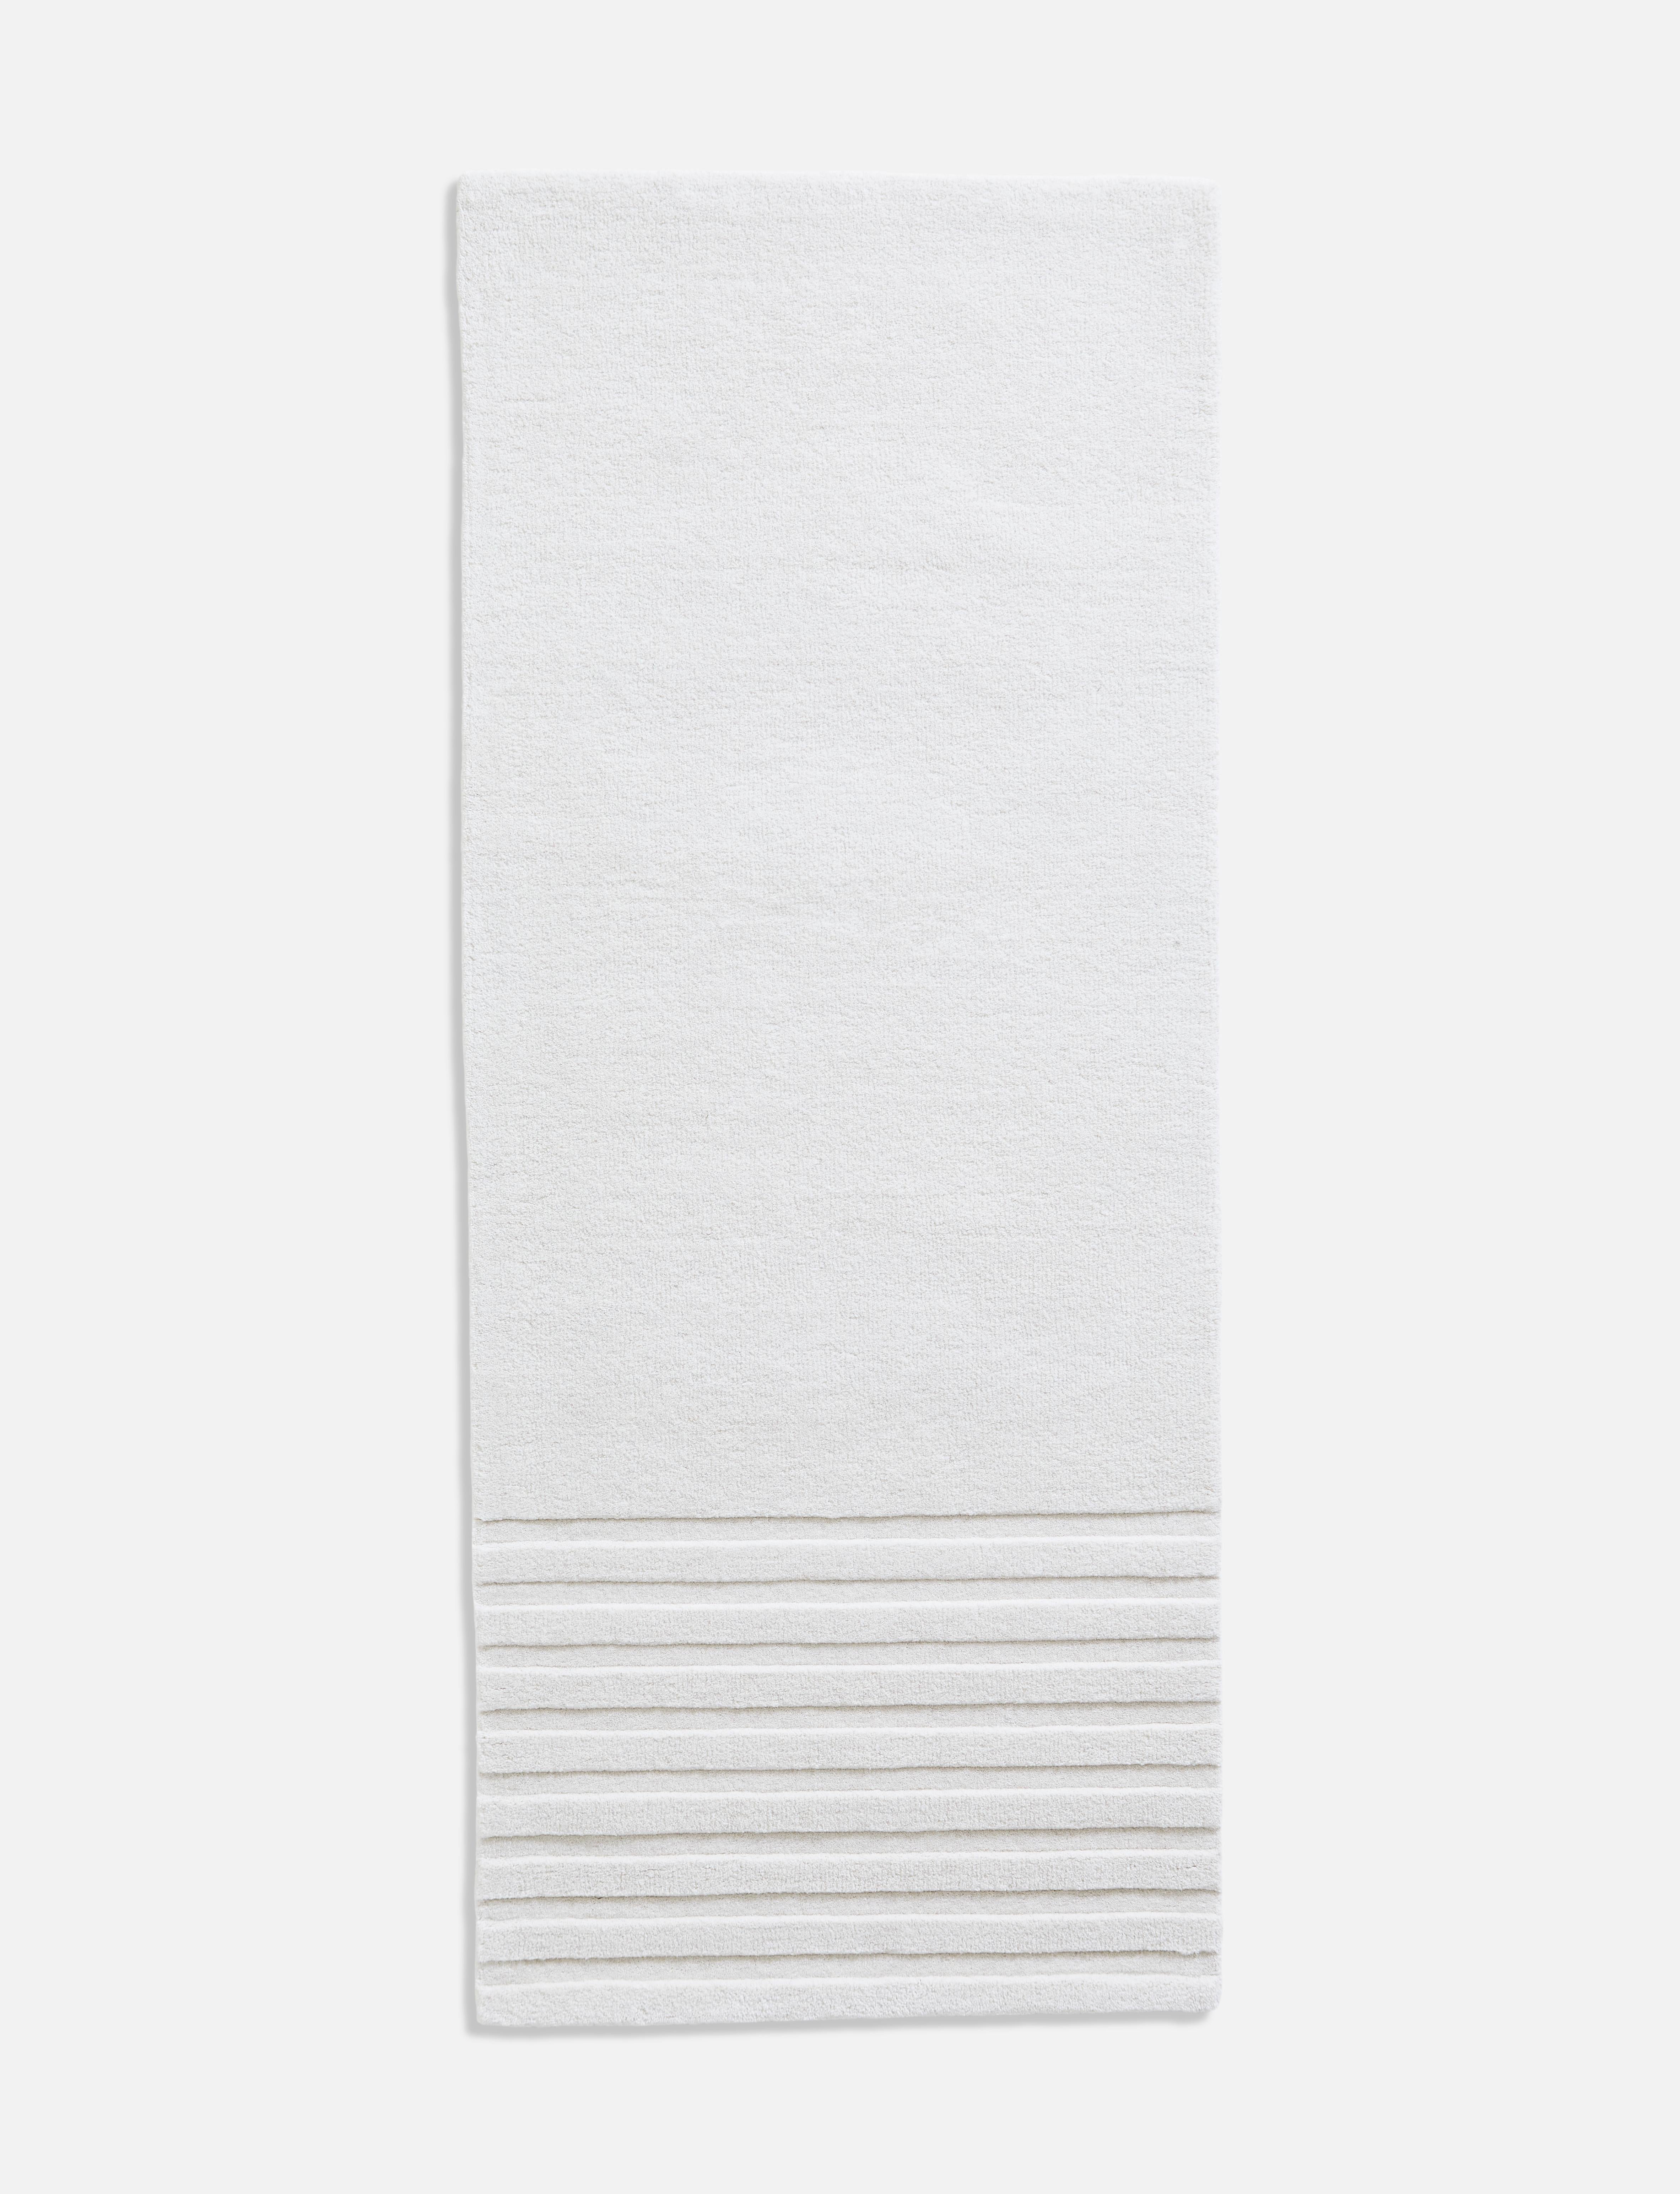 Post-Modern White Kyoto Rug II by Ad Miller For Sale